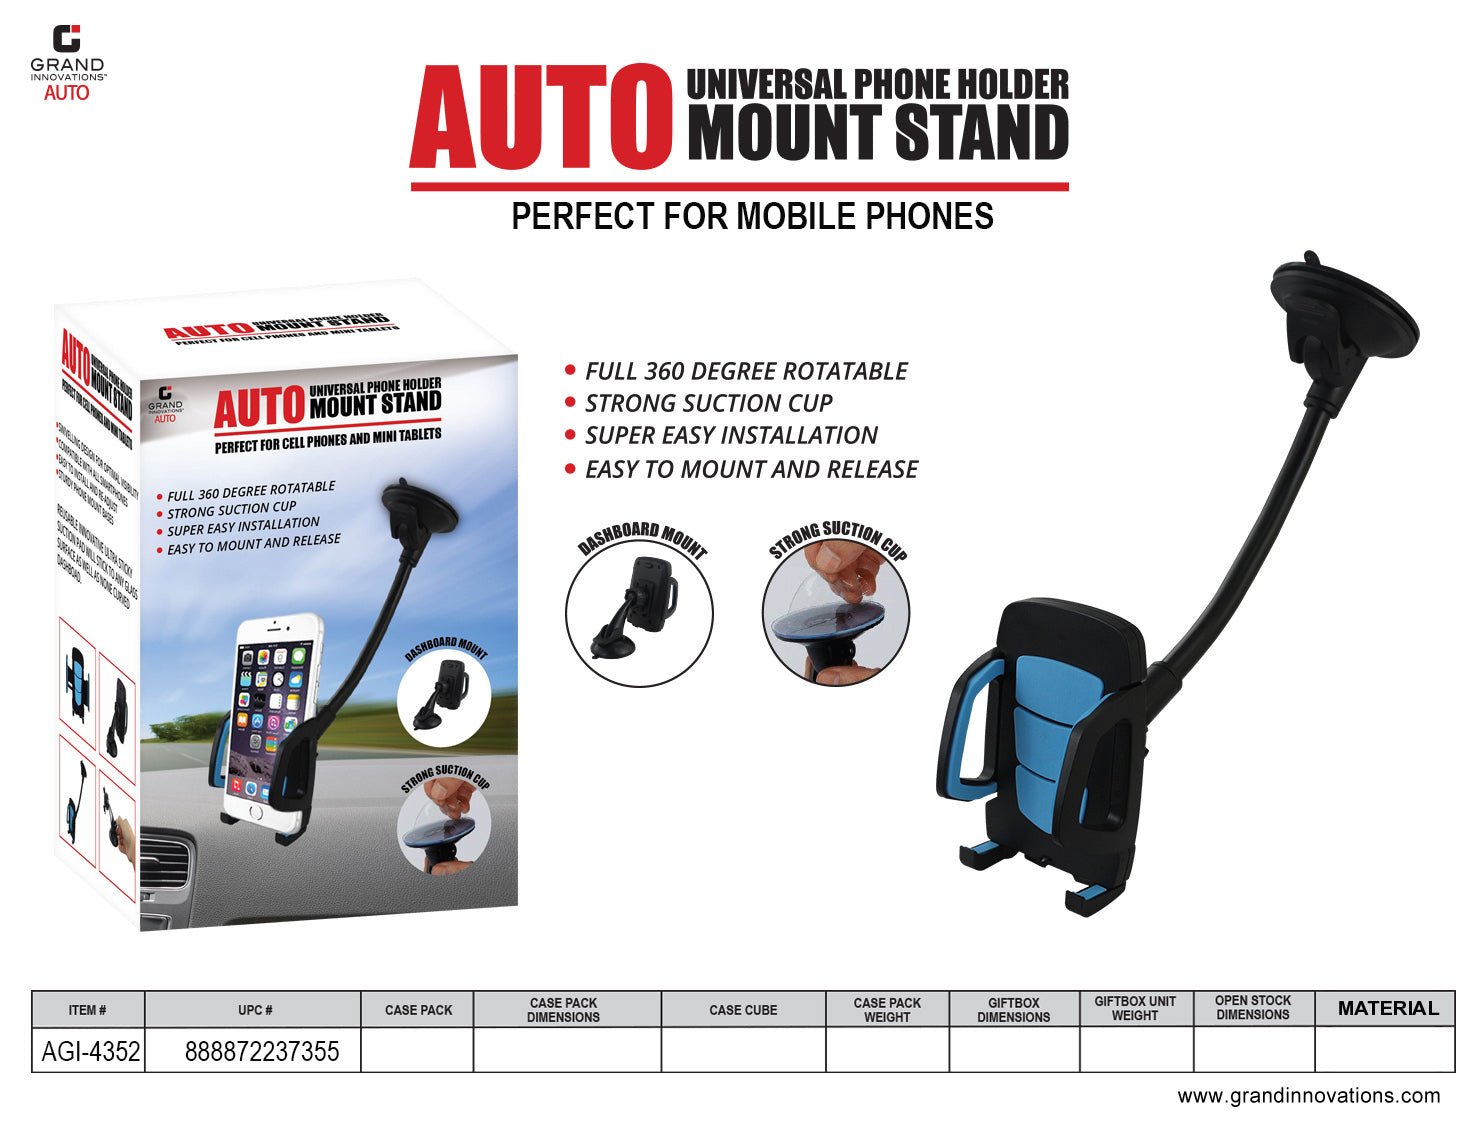 Grand Innovations Auto Universal Phone Holder Mount Stand, 12 Pack